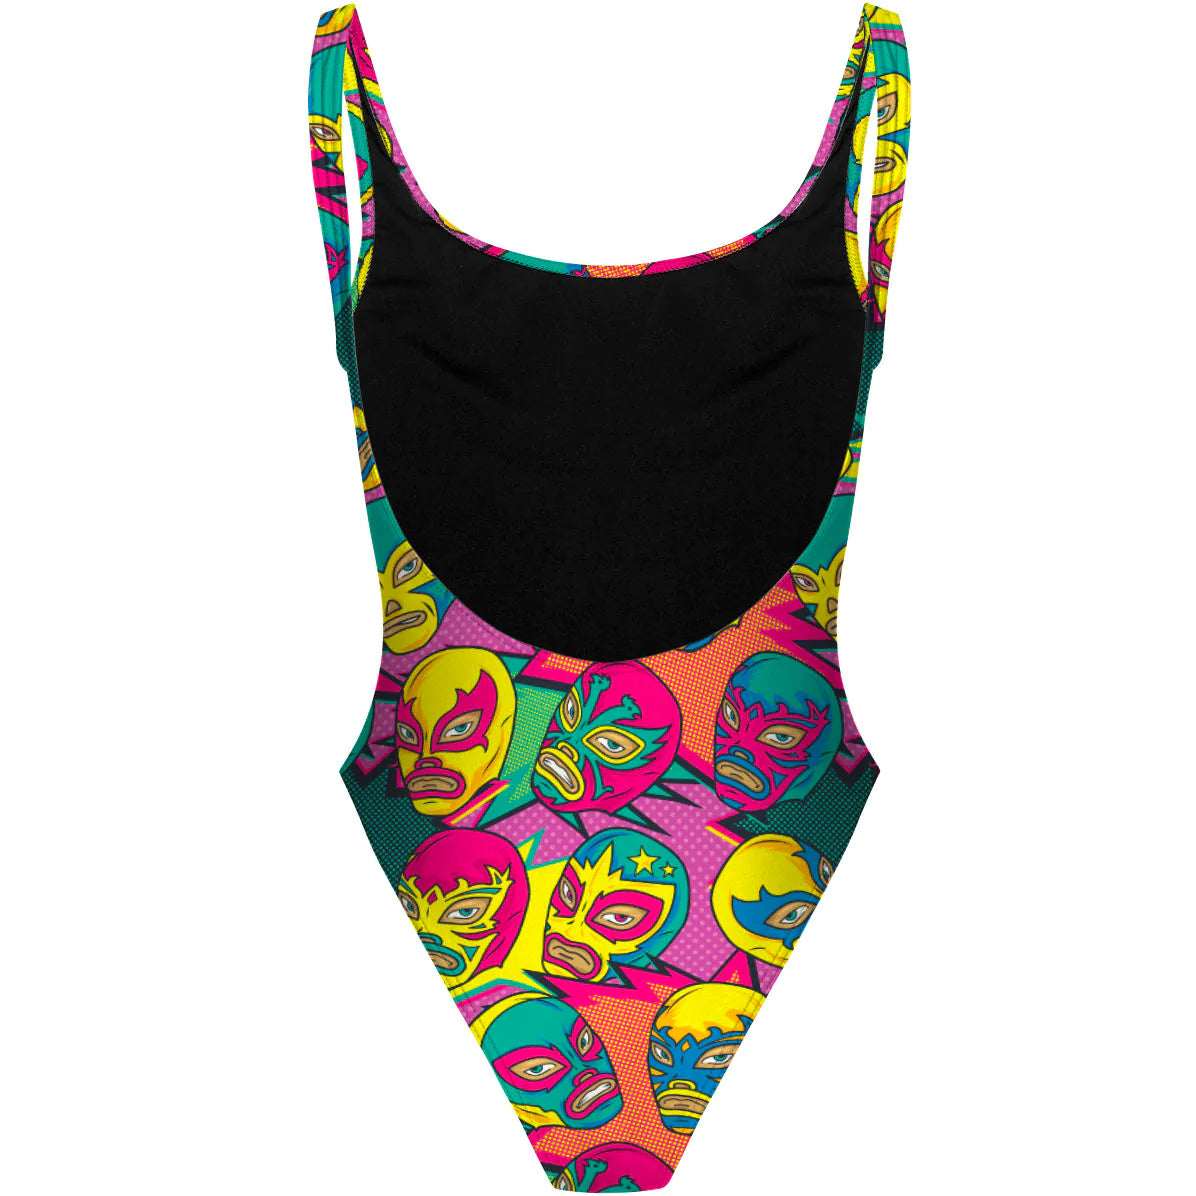 Comic Wrestling Masks - High Hip One Piece Swimsuit